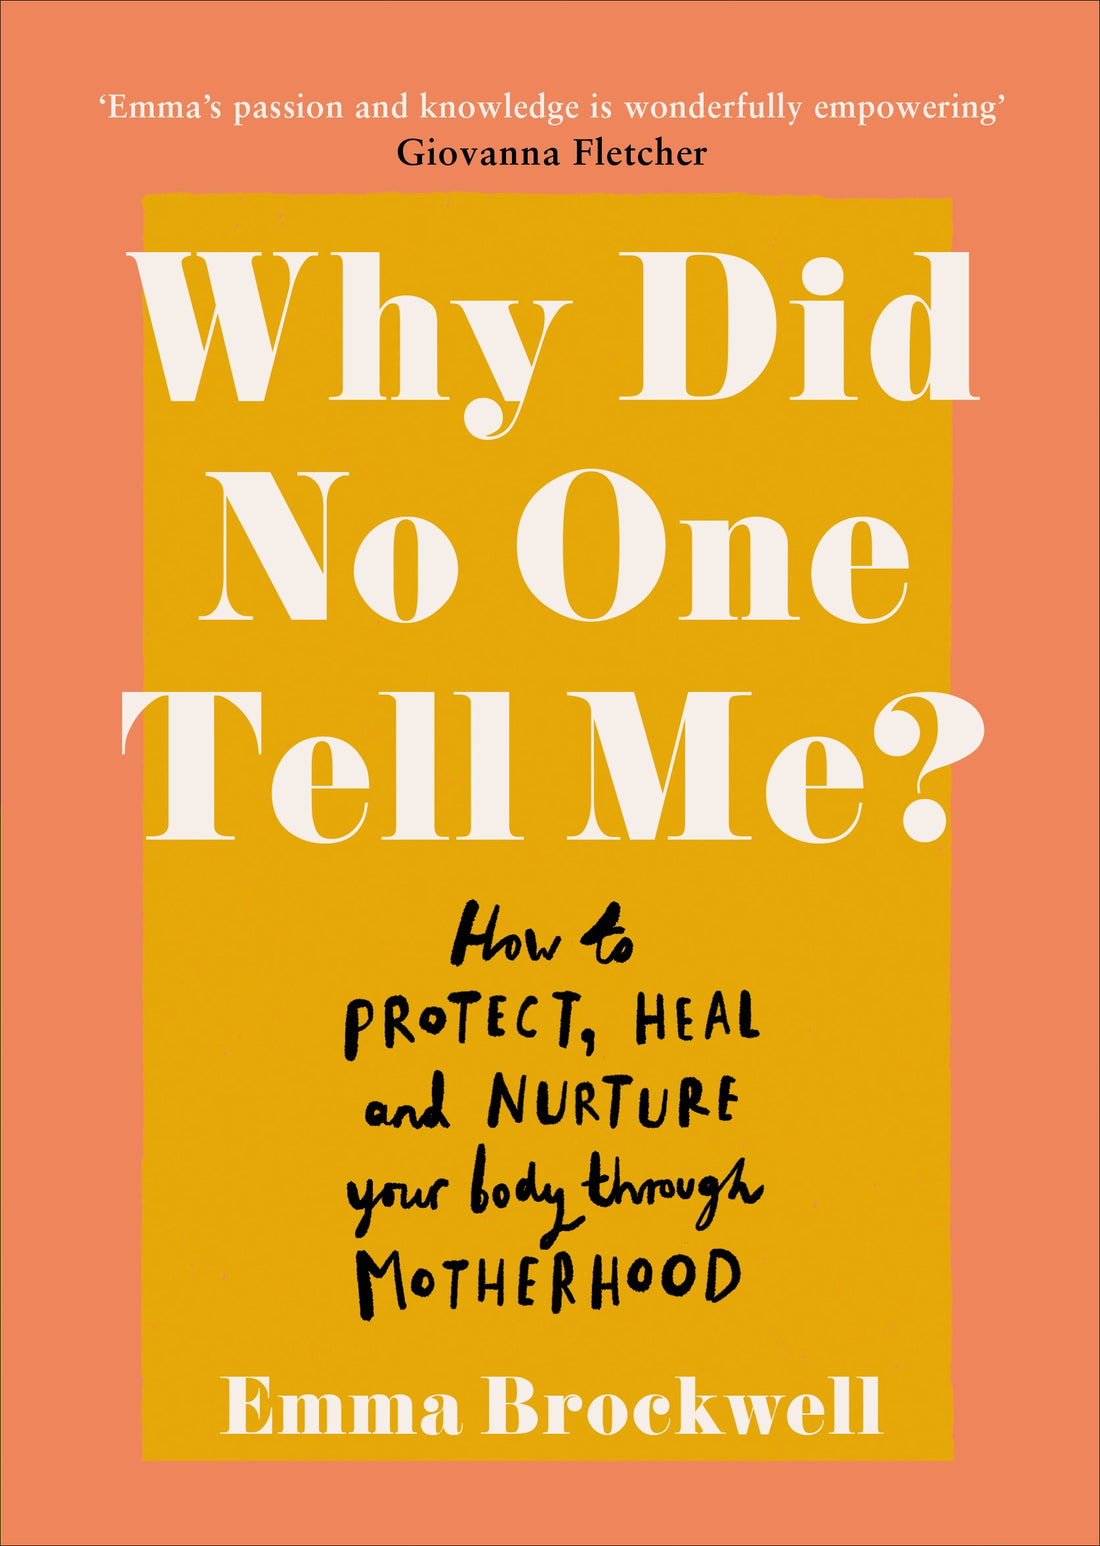 WHY DID NO ONE TELL ME? BY EMMA BROCKWELL